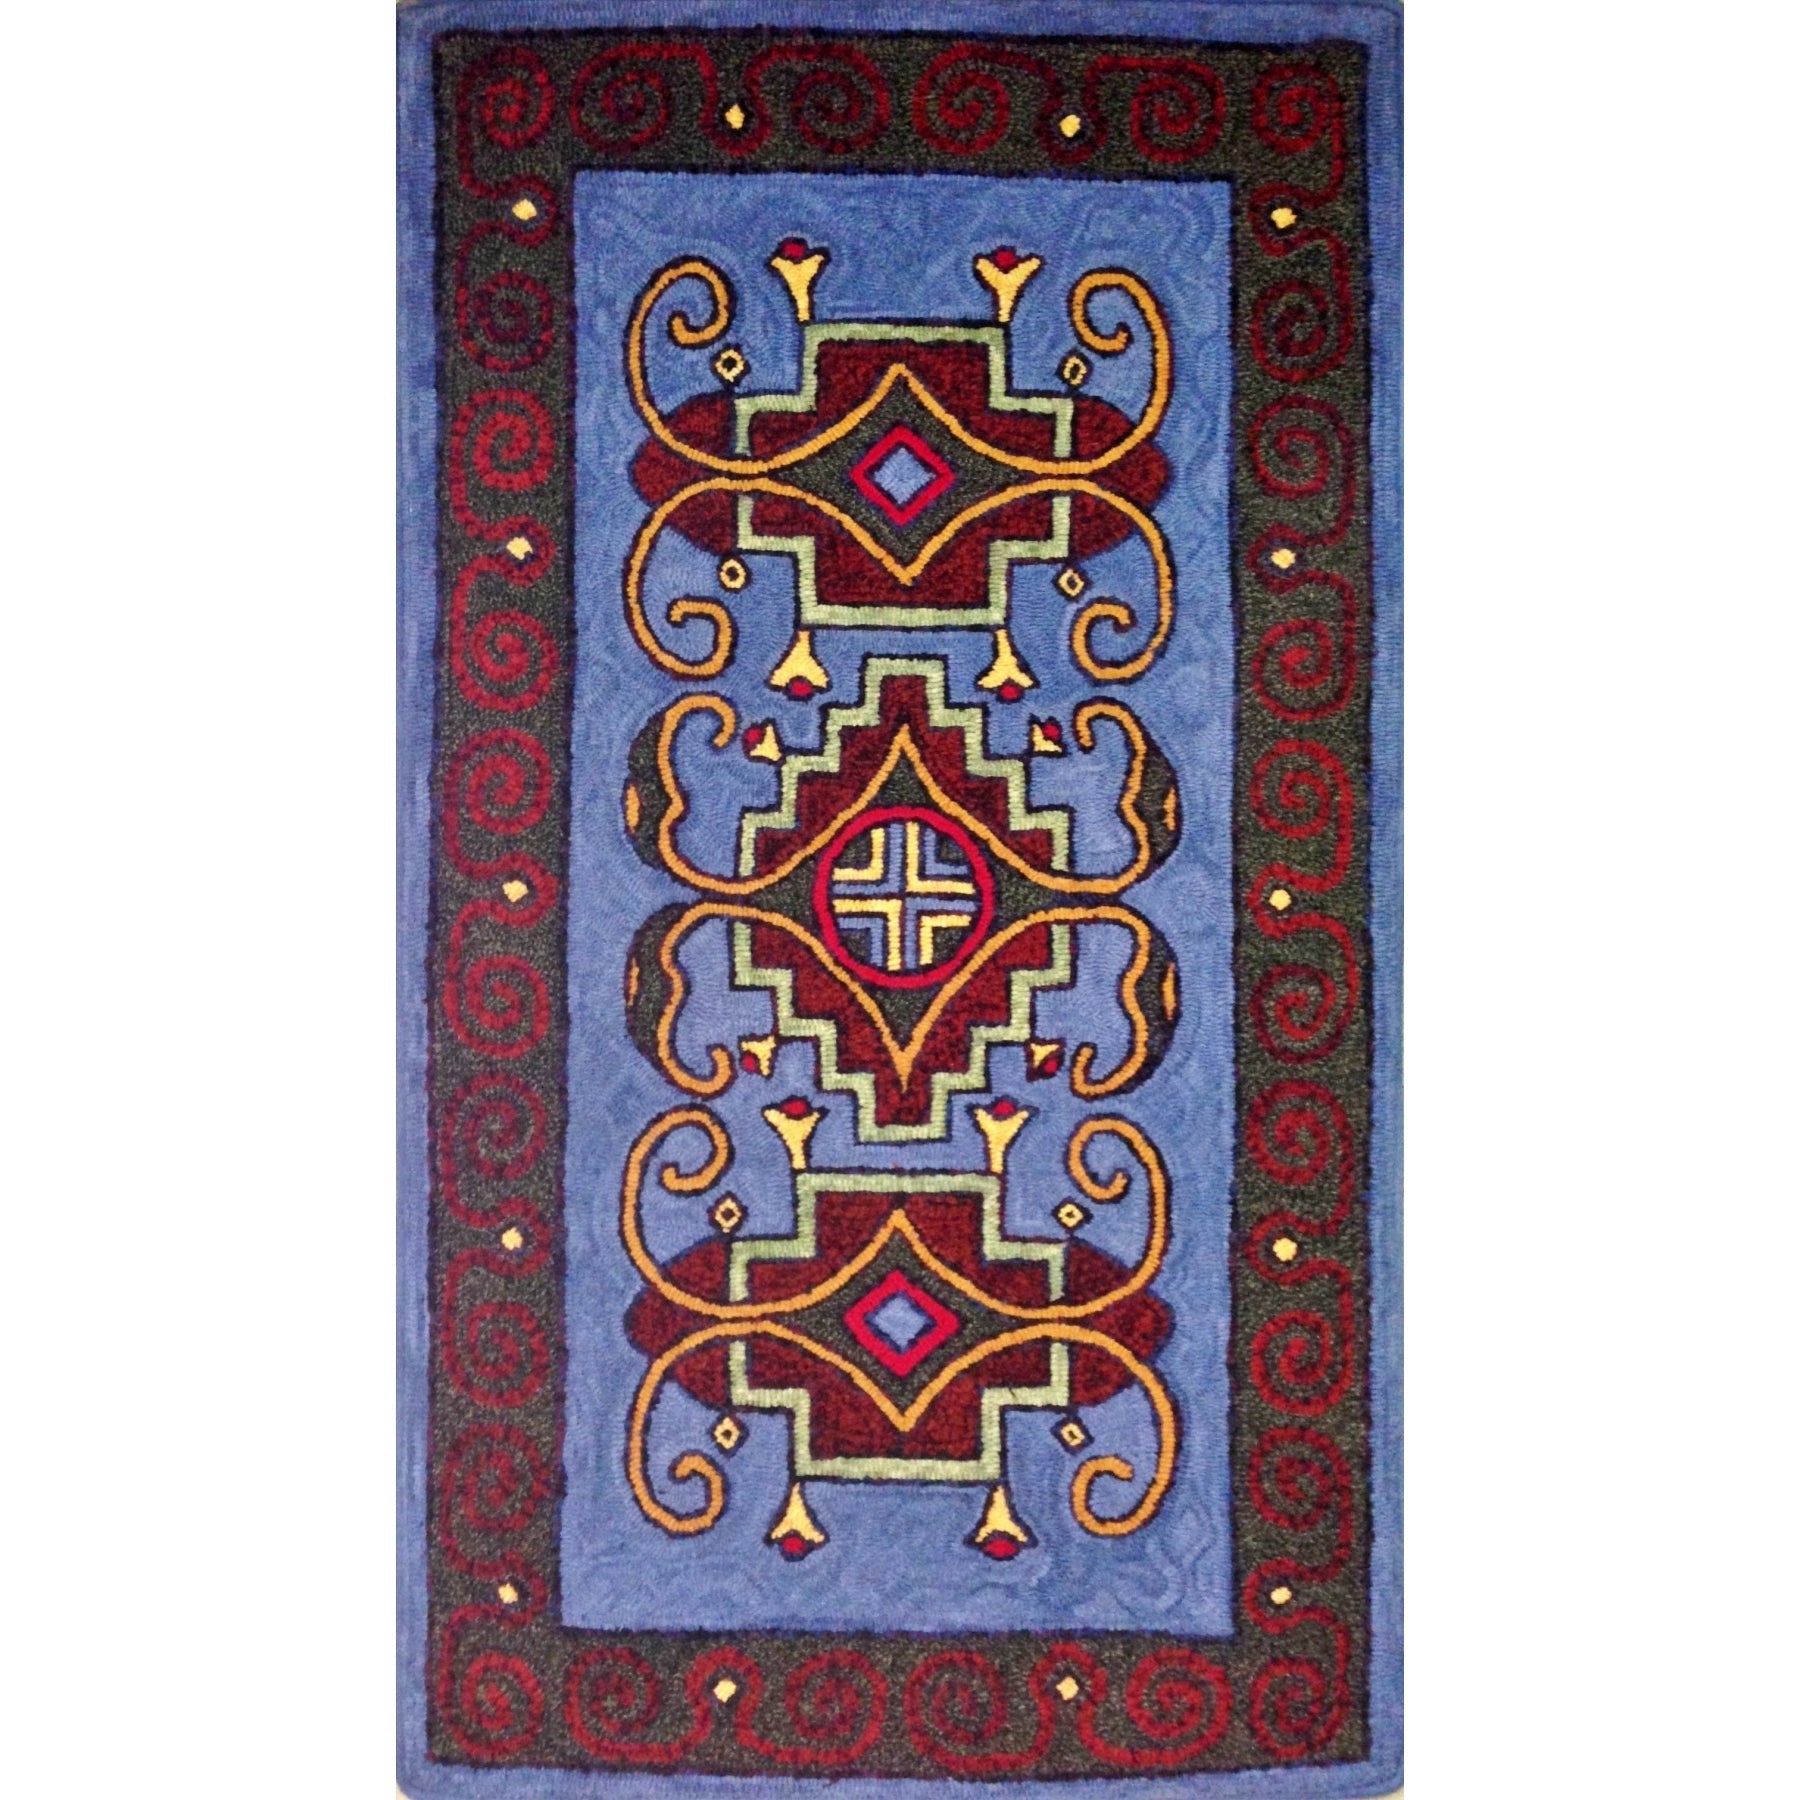 Micmac - Large, rug hooked by Elise Roberts